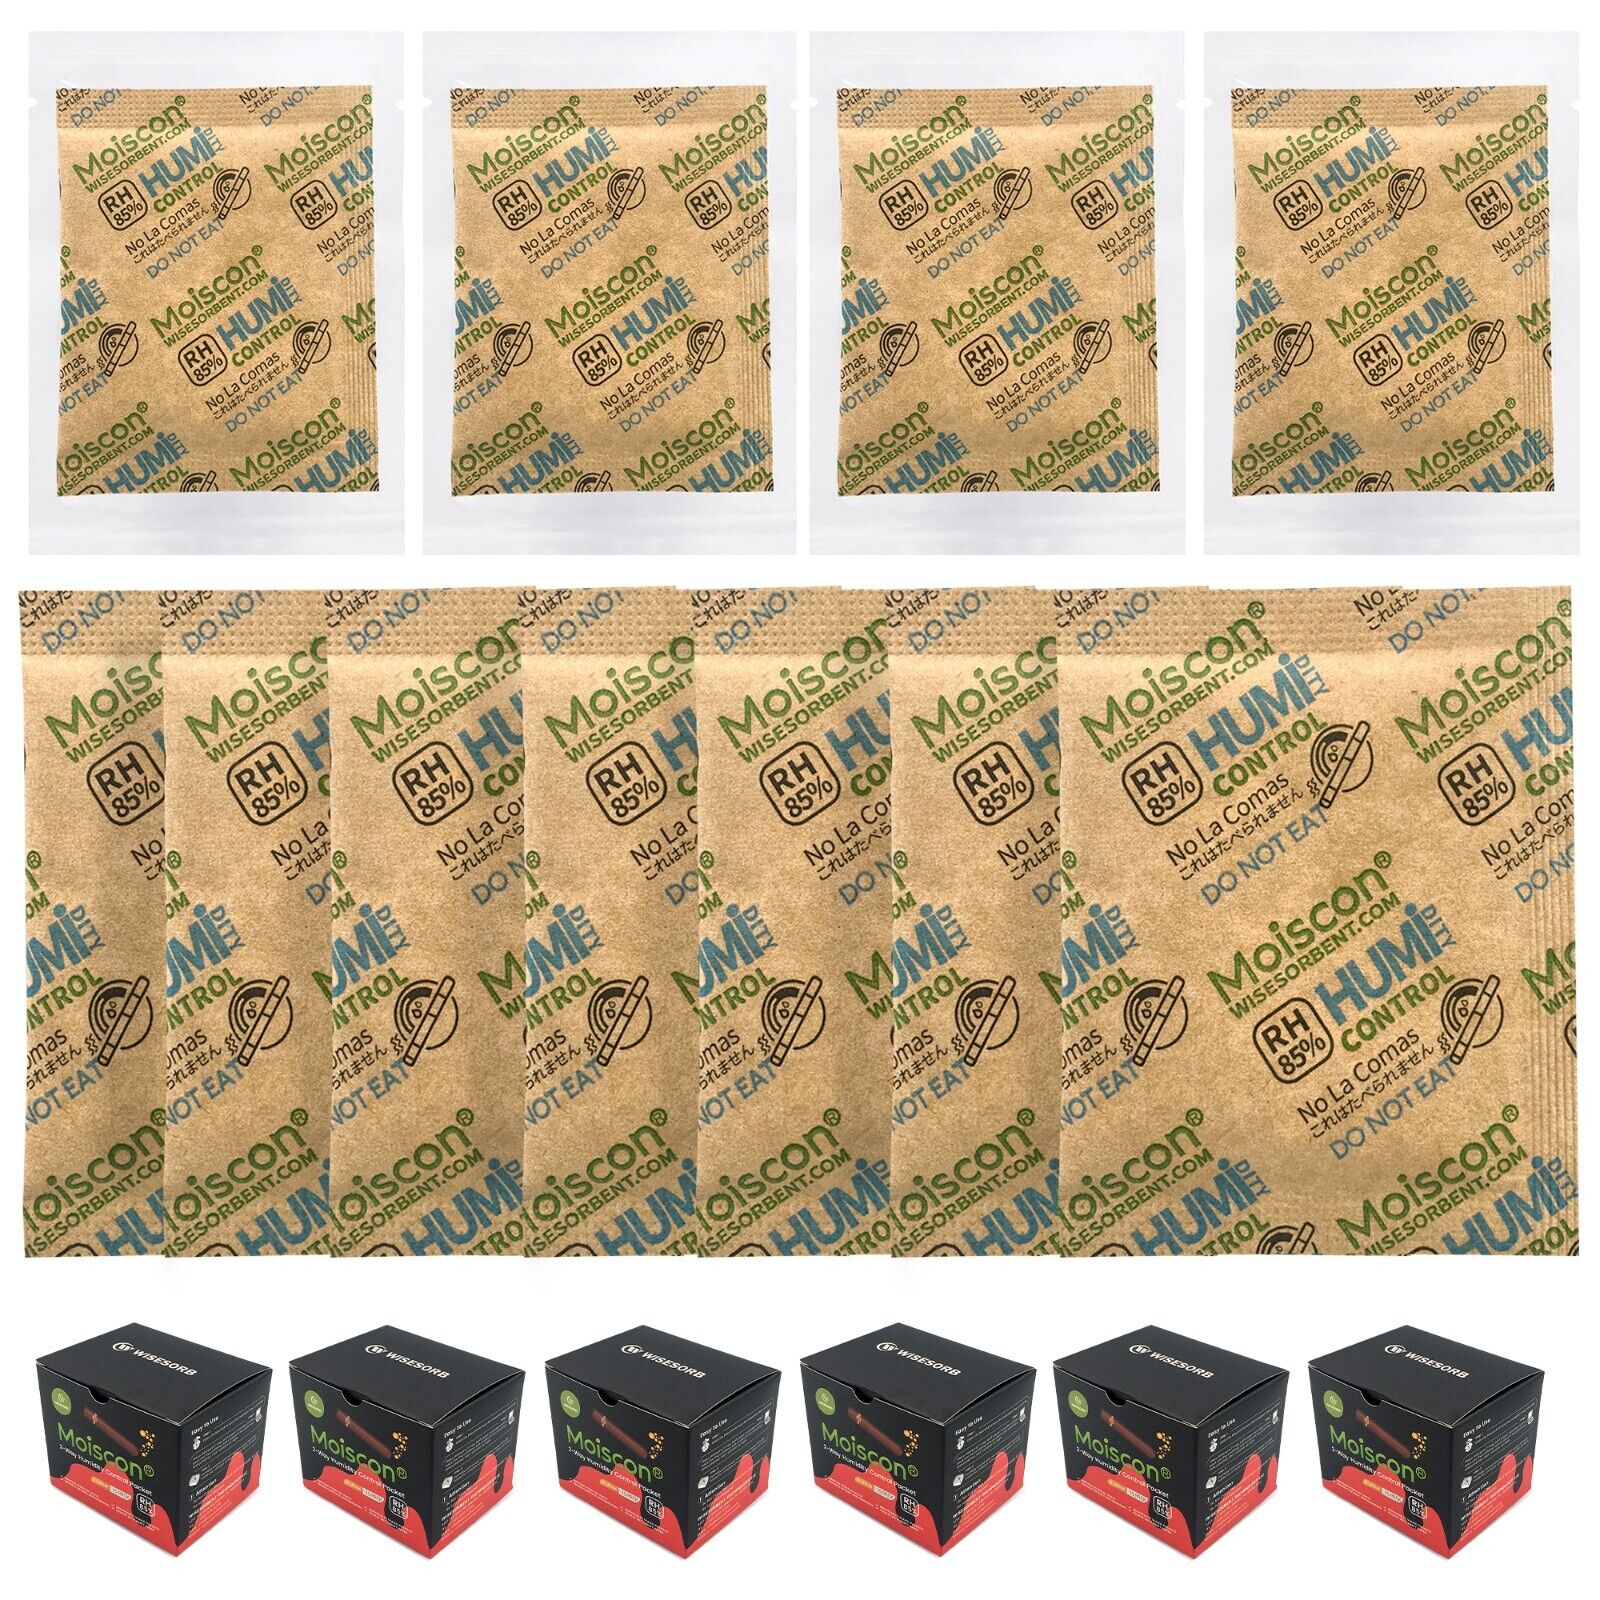 85%RH Two-Way Humidity Control Packs 8 Gram 90 Pack Individually Wrapped